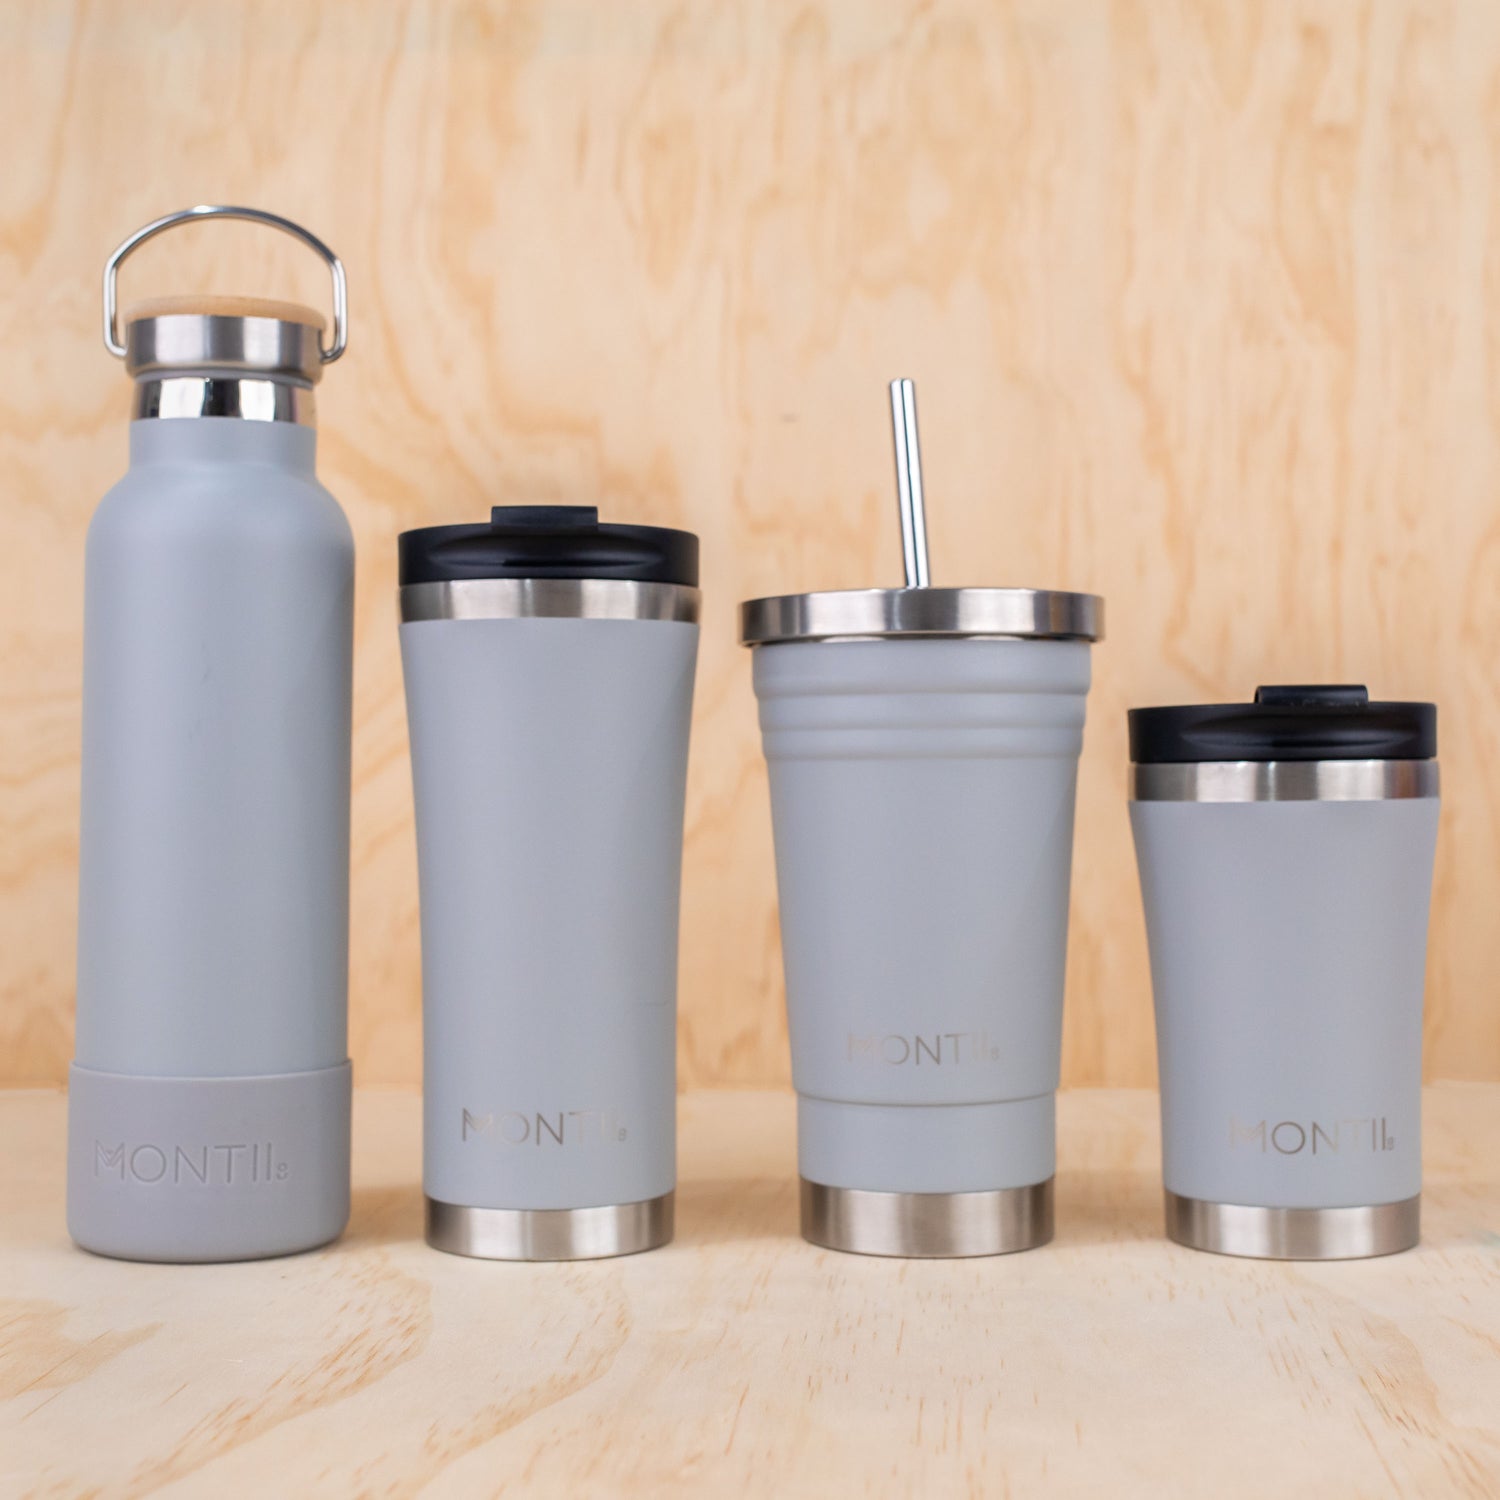 MontiiCo Insulated Smoothie Cups